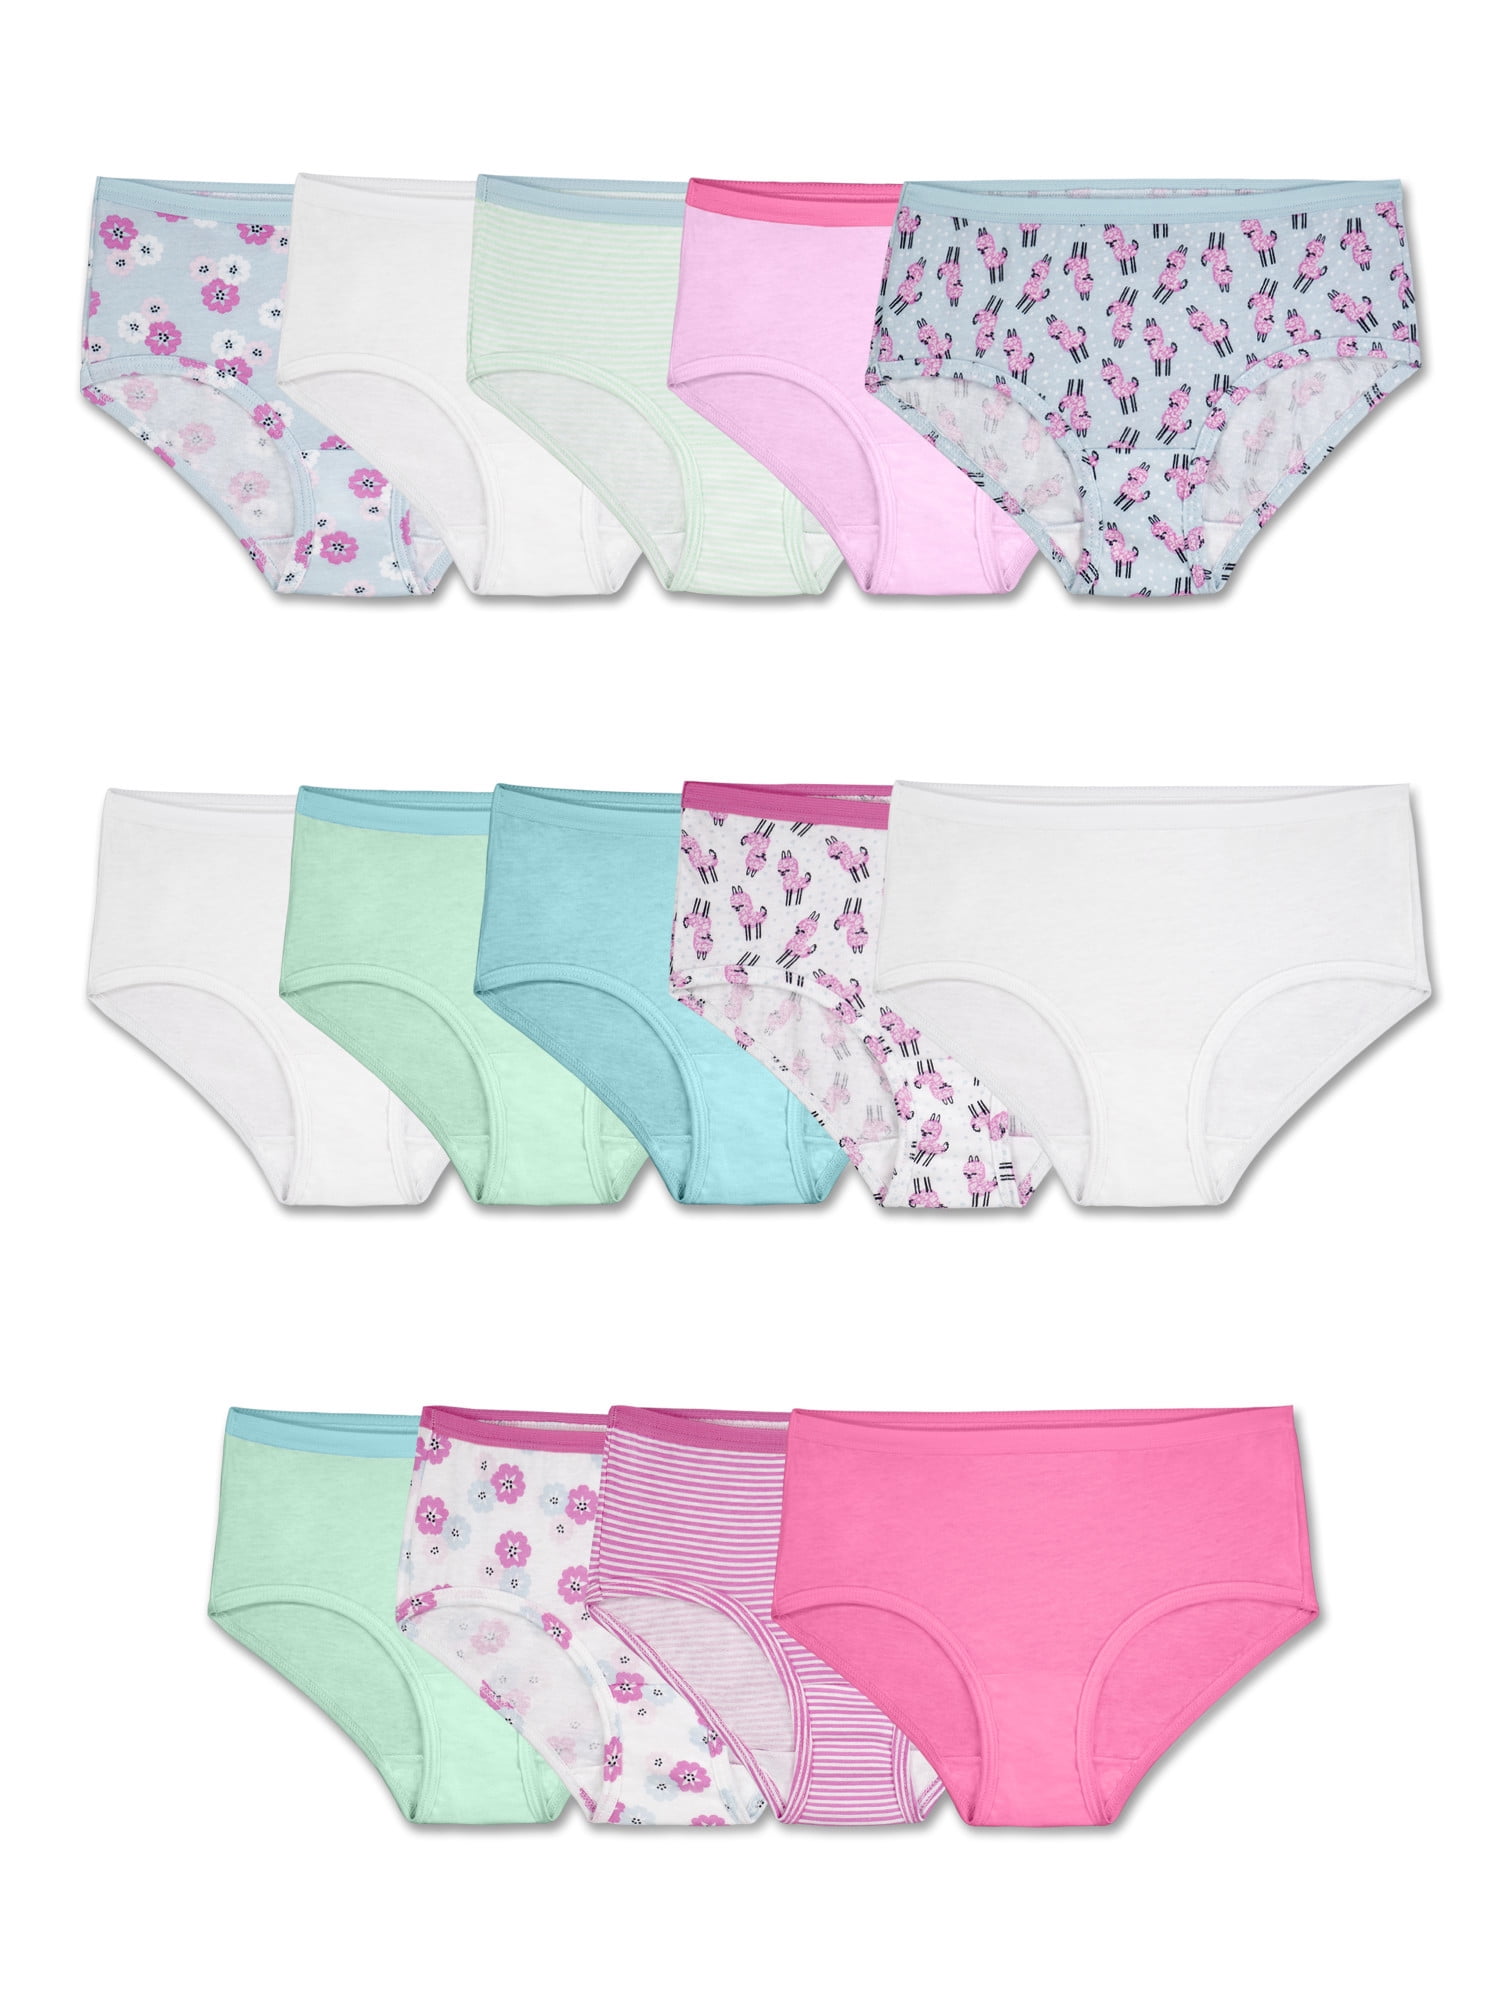 Girls Briefs 3 6 9 Pack Pants Knickers Hipster  School 1-14 Years 